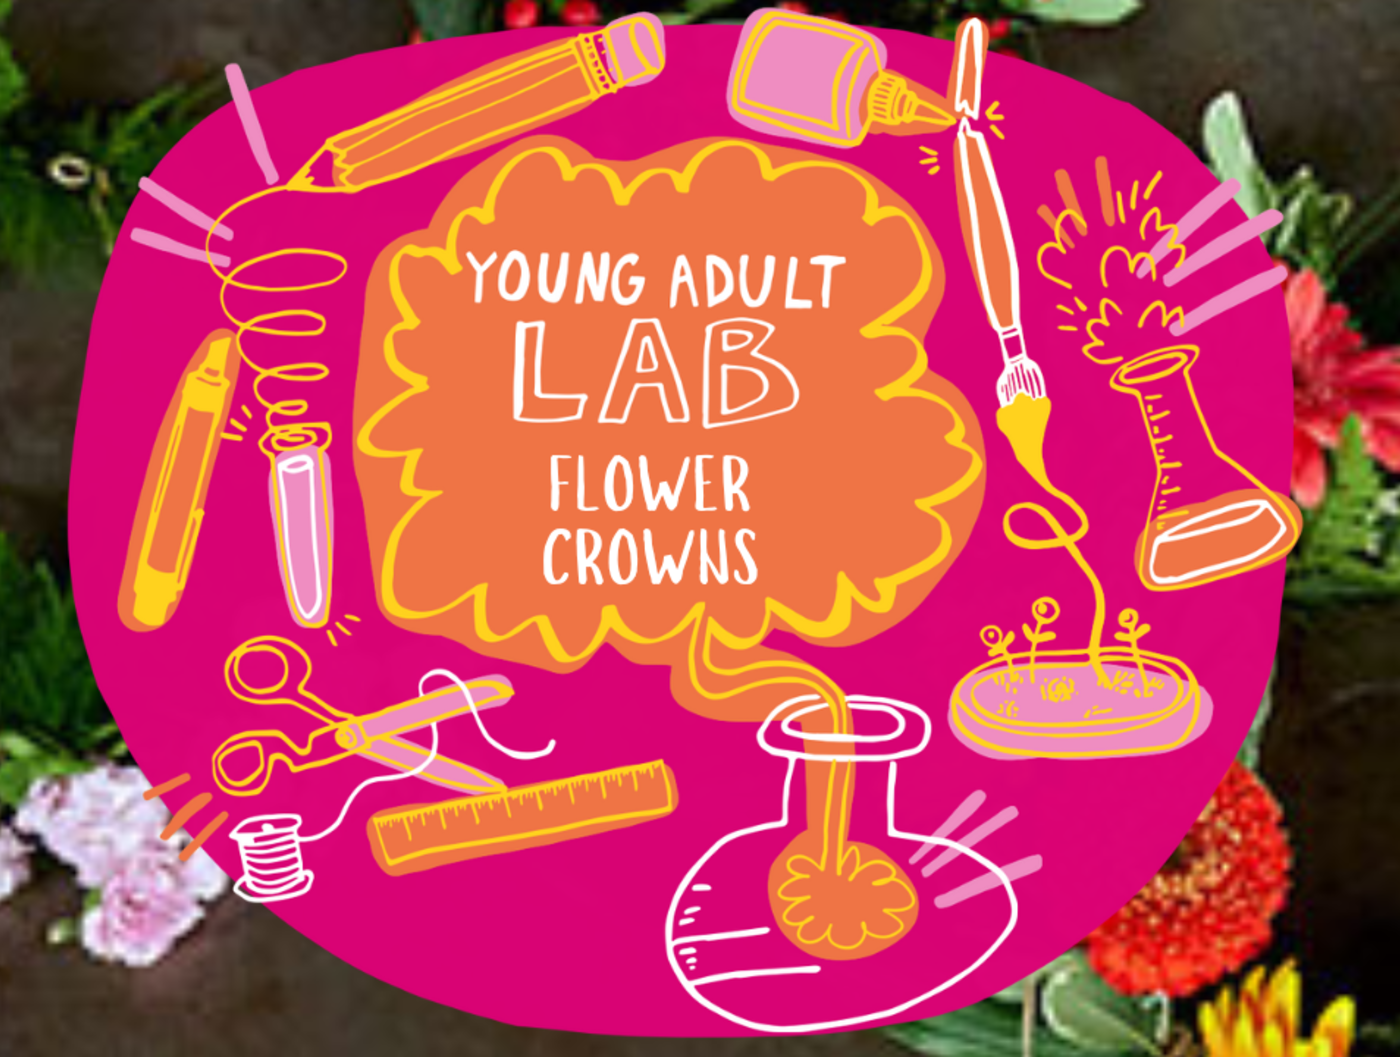 Young Adult Lab: Community Stories